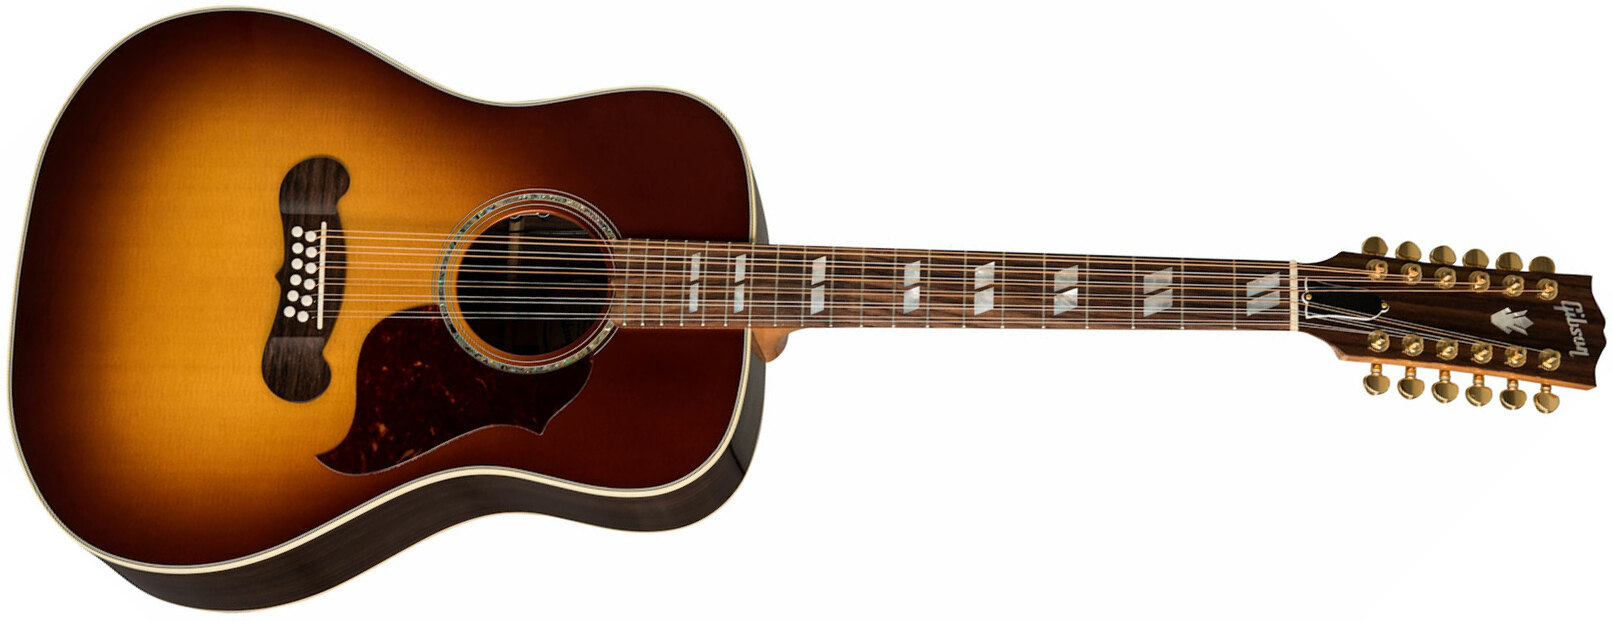 Gibson Songwriter 12-string 2019 Dreadnought 12c Epicea Palissandre Rw - Rosewood Burst - Guitarra electro acustica - Main picture